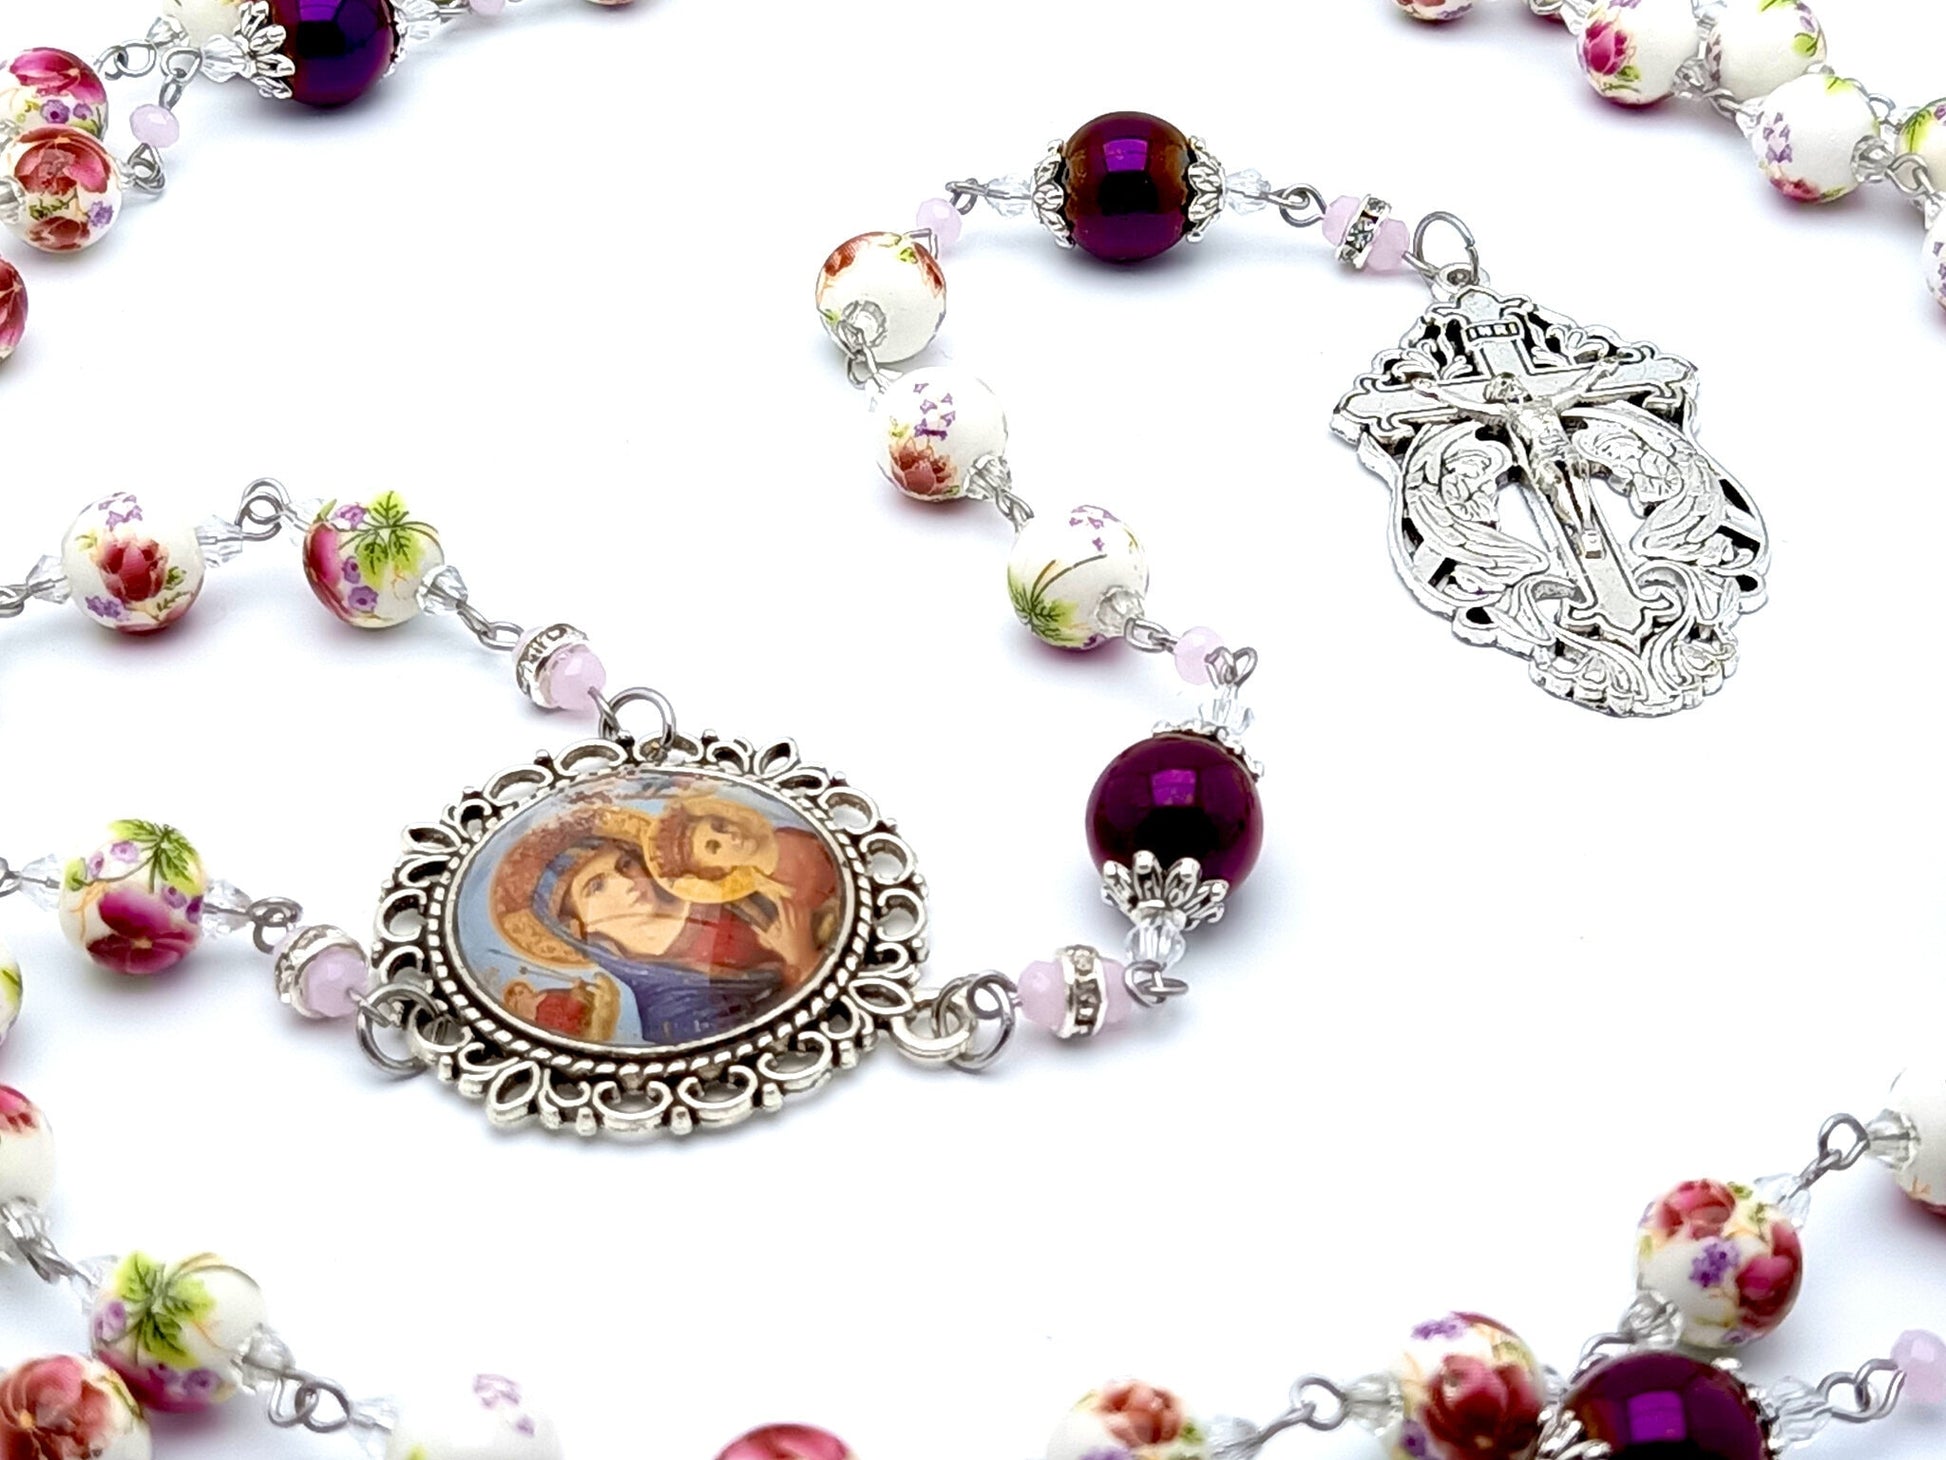 Our Lady of Perpetual Help unique rosary beads with floral porcelain and purple glass beads and Holy Angel crucifix.